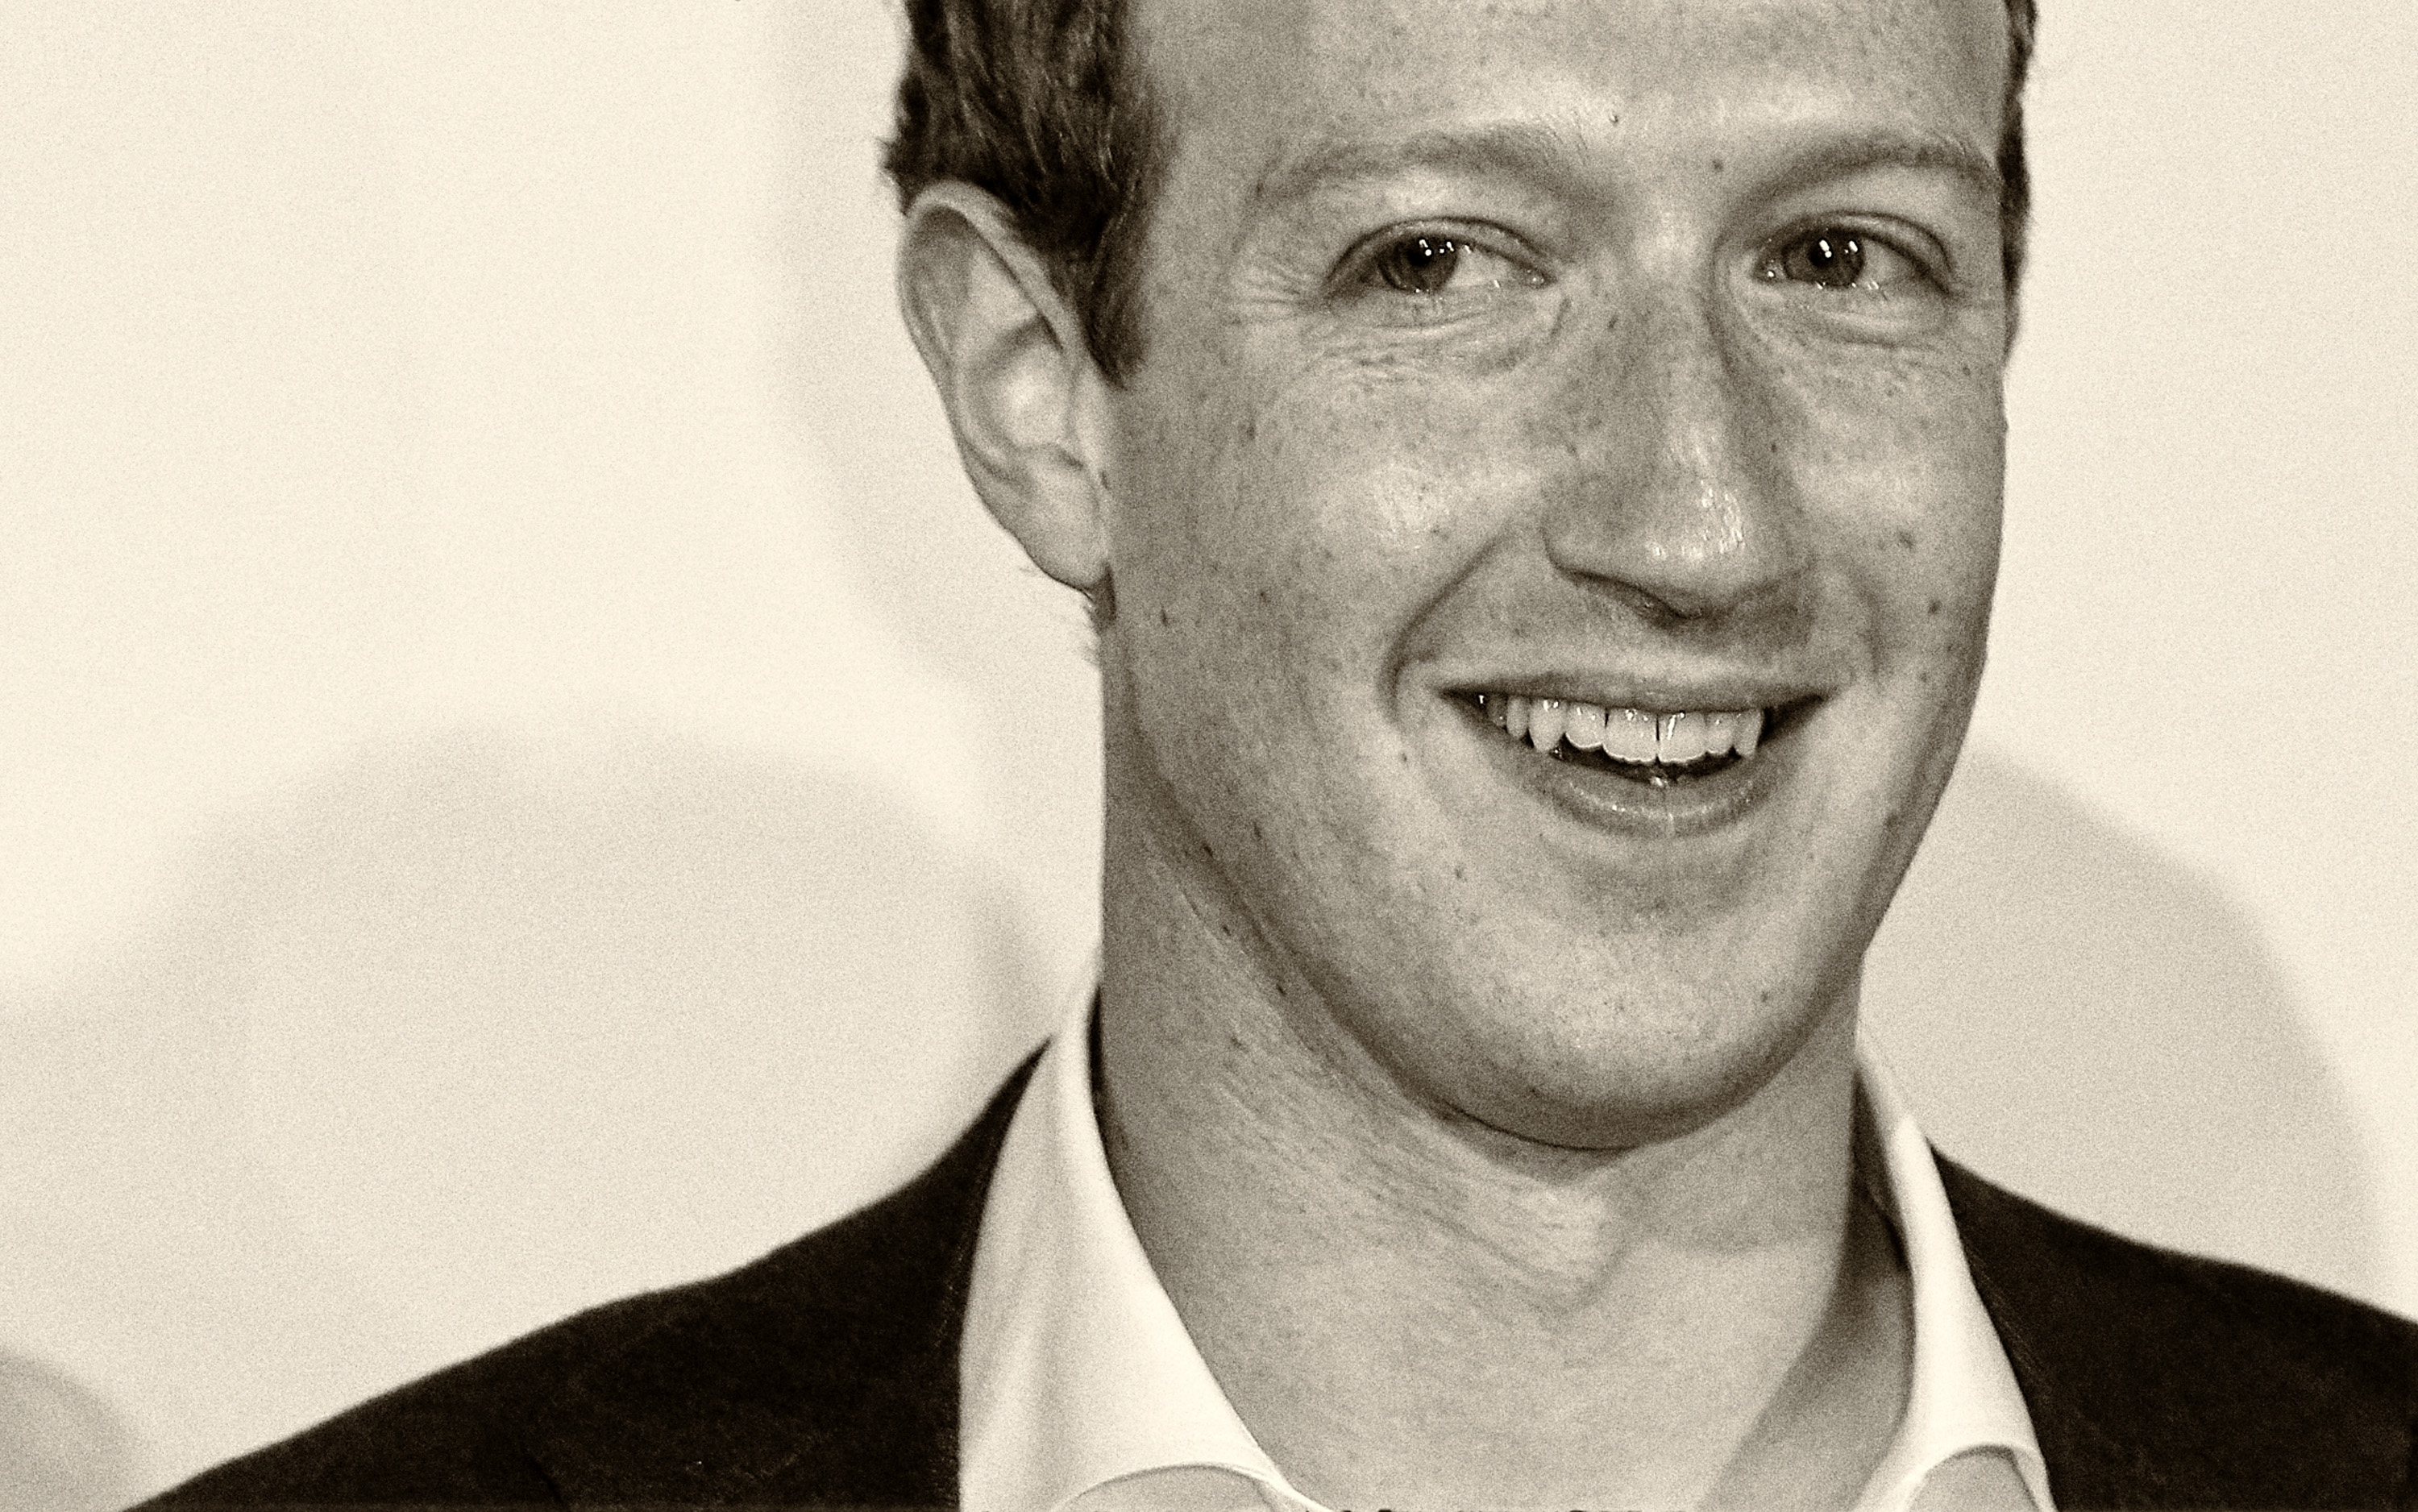 At 32 years of age, Mark Zuckerberg could remain the CEO of Facebook for another 50 years.